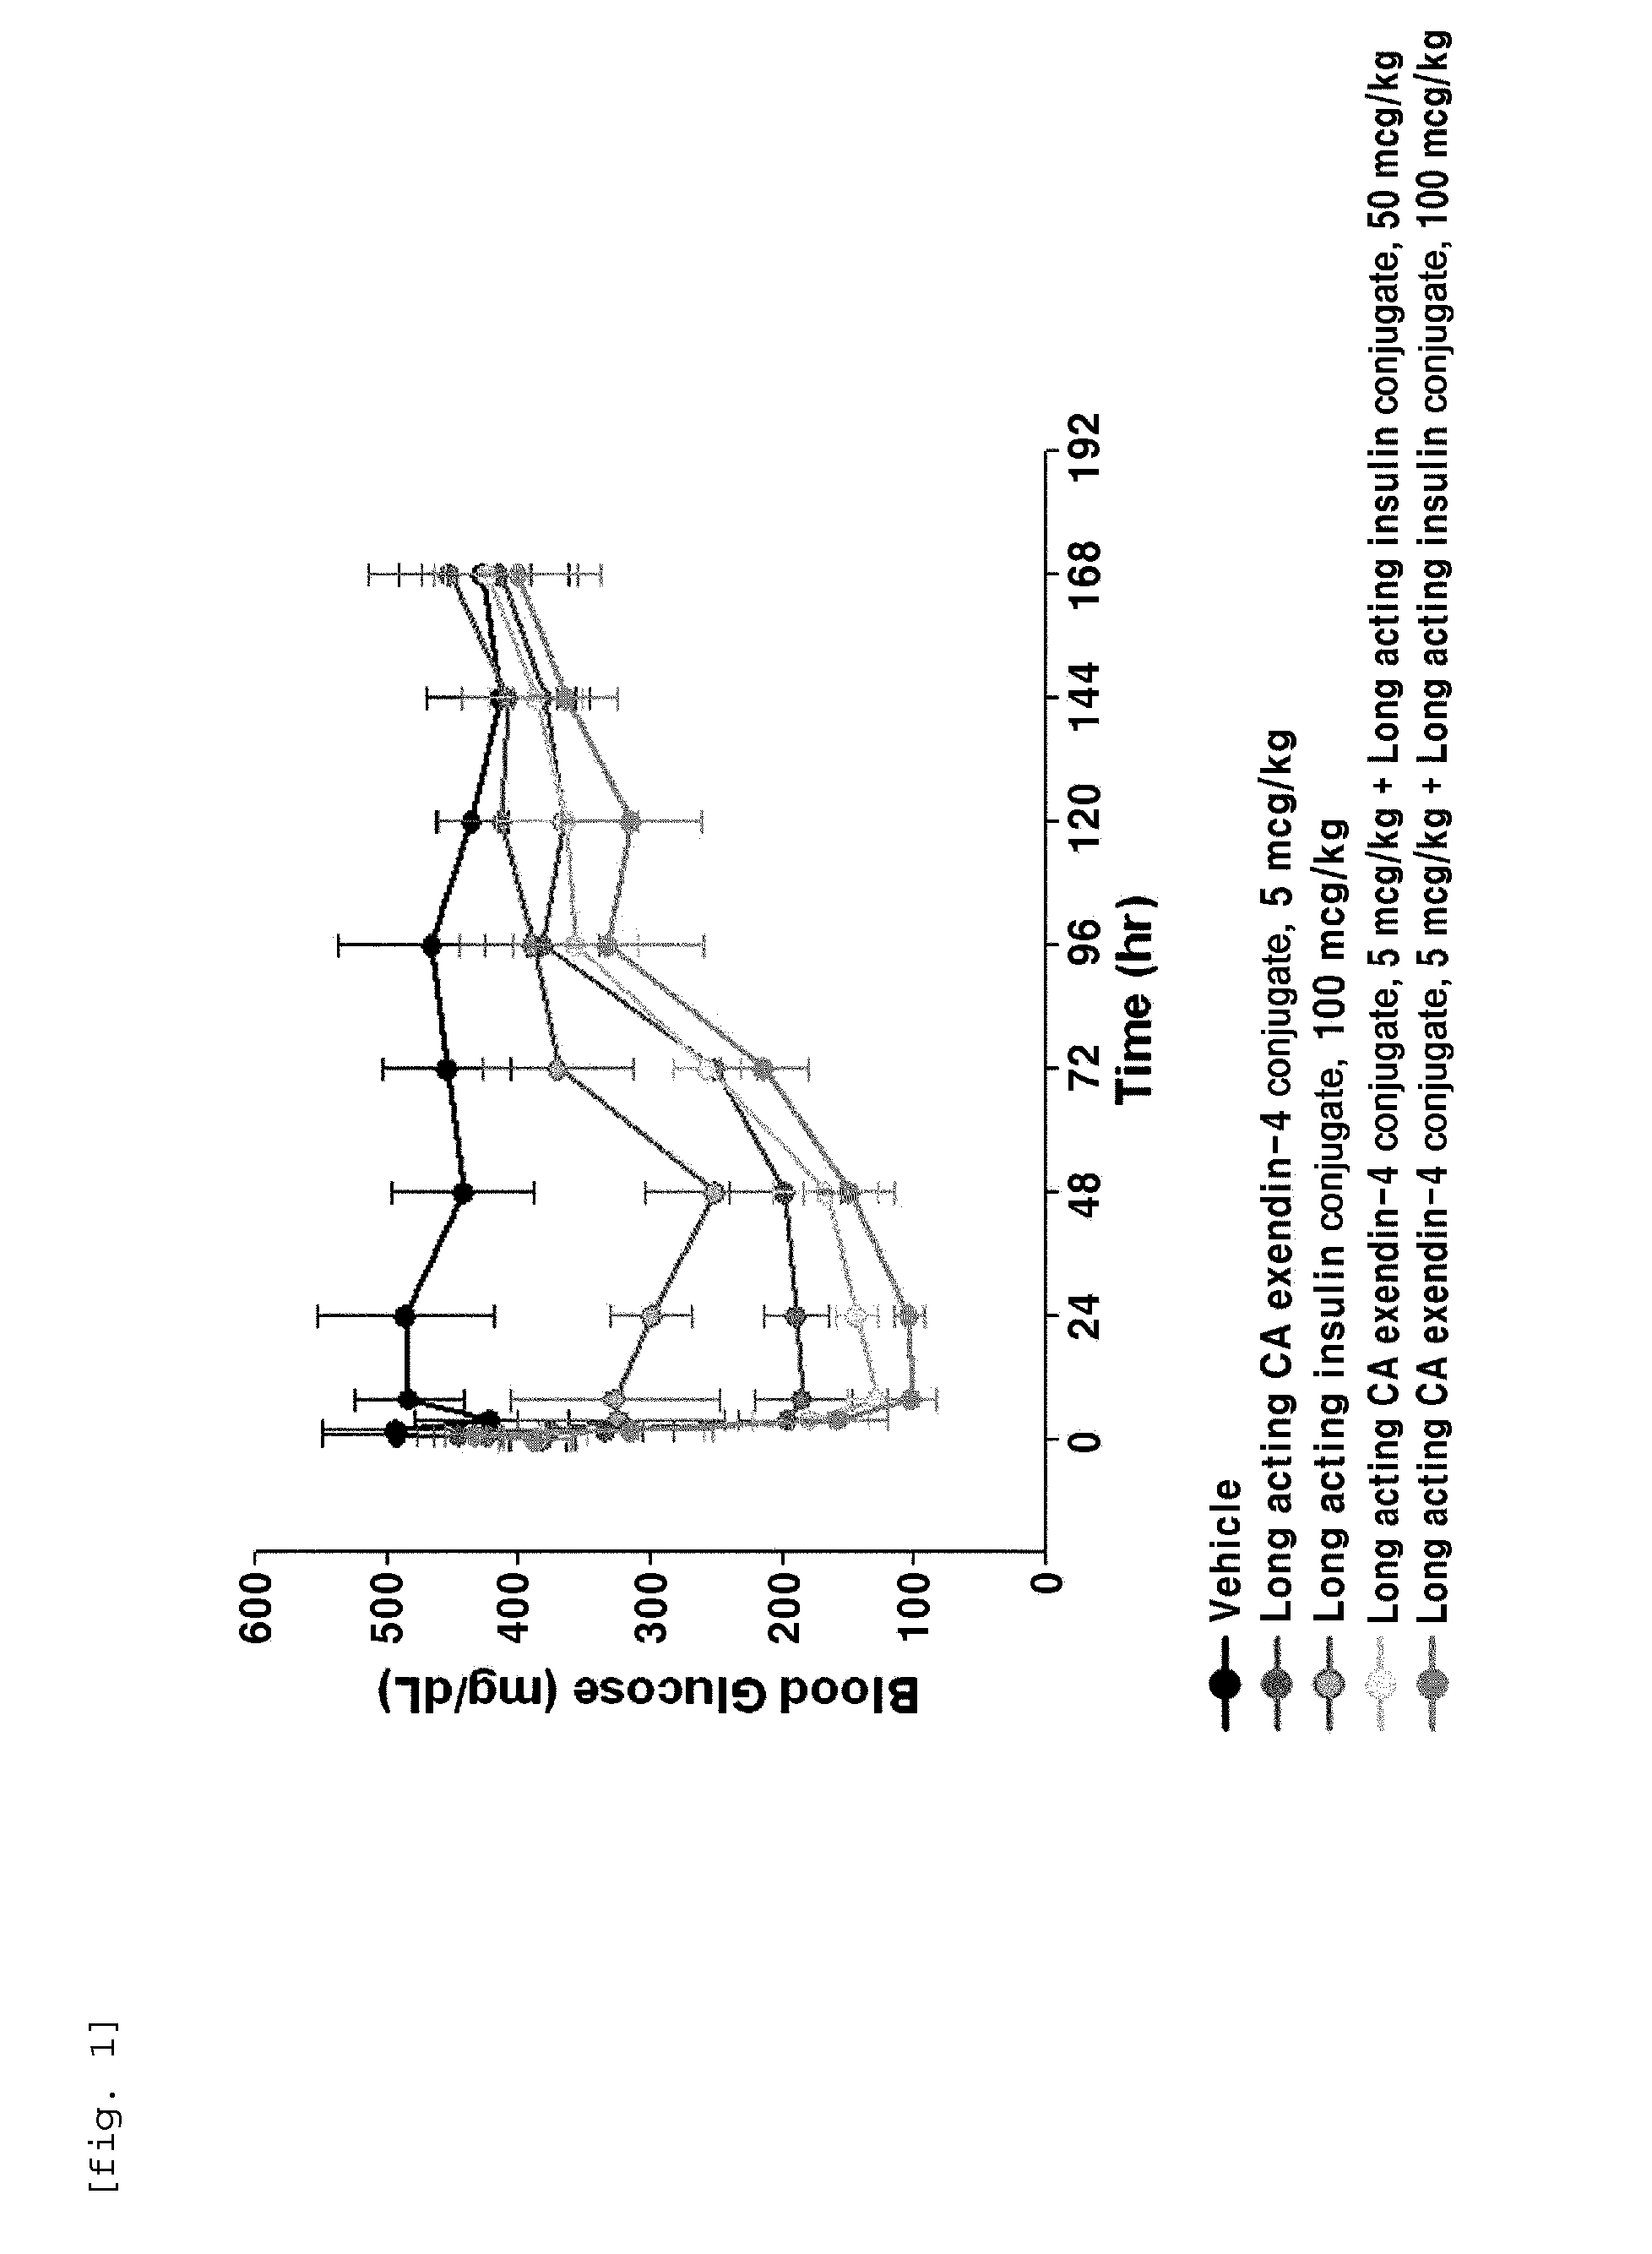 Composition for treating diabetes comprising long-acting insulin conjugate and long-acting insulinotropic peptide conjugate